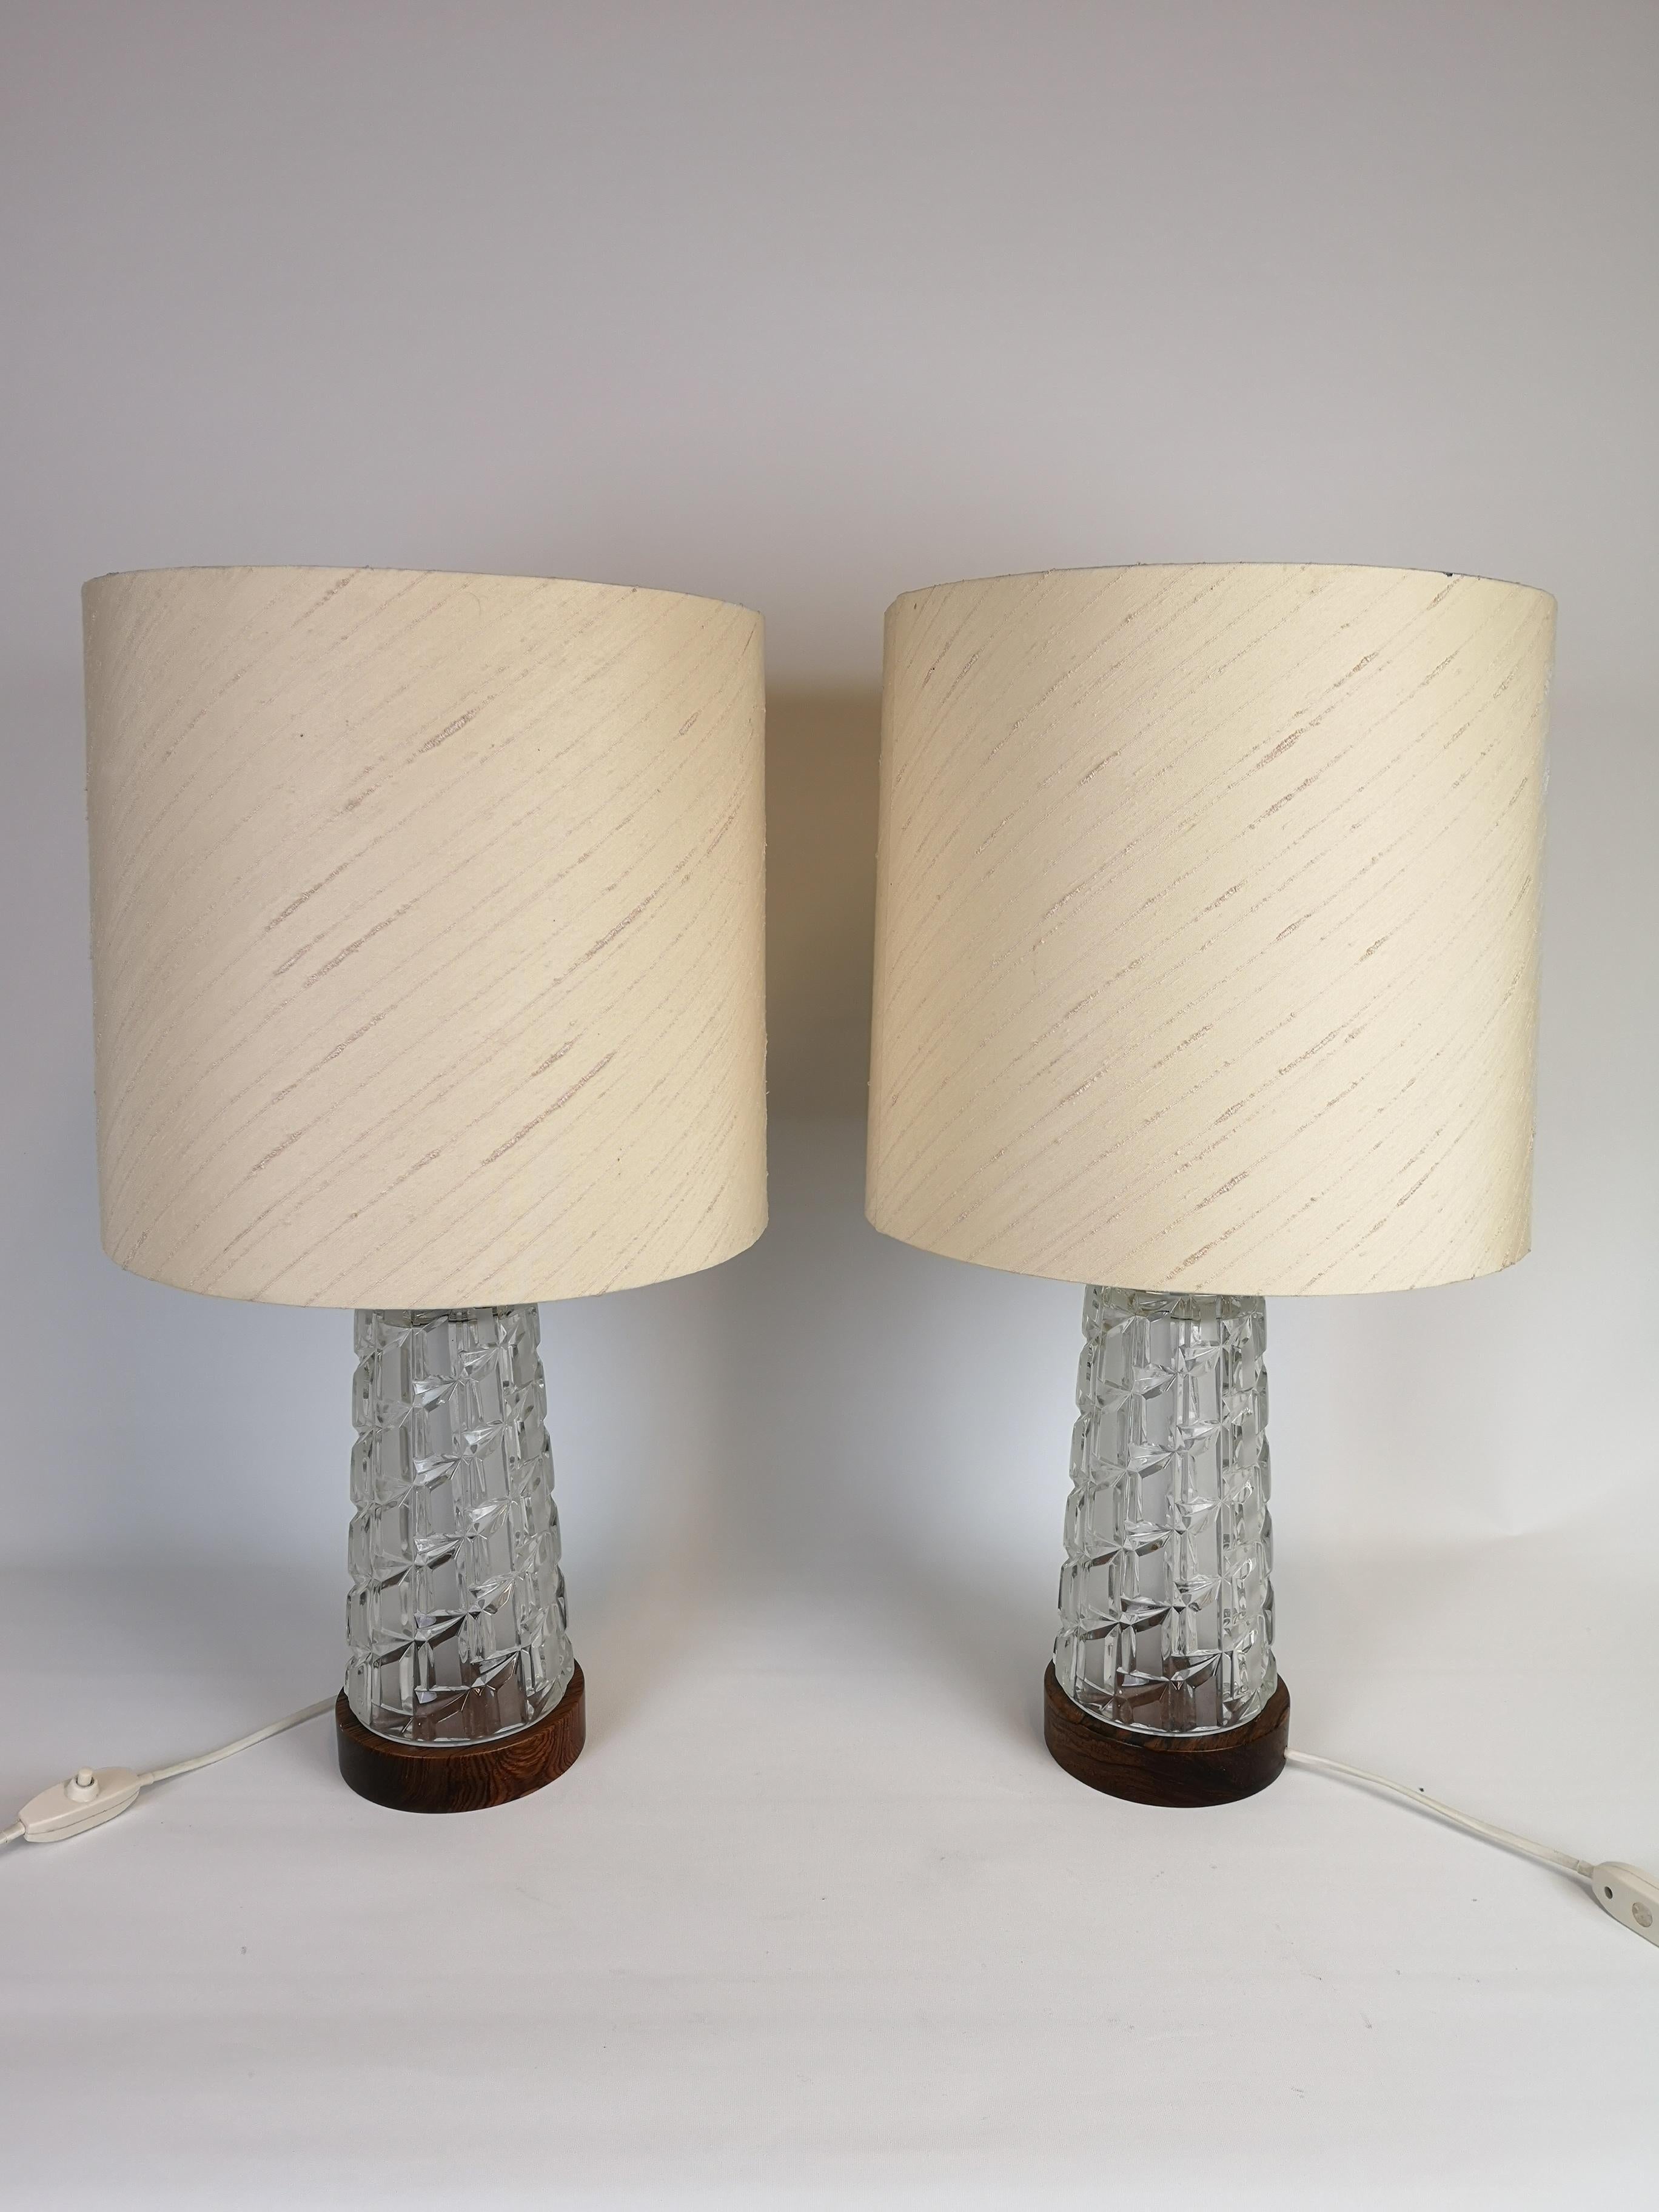 Wonderful midcentury lamps in teak and glass. 

Good working condition with original shades

Measured H 33 without shades.
  